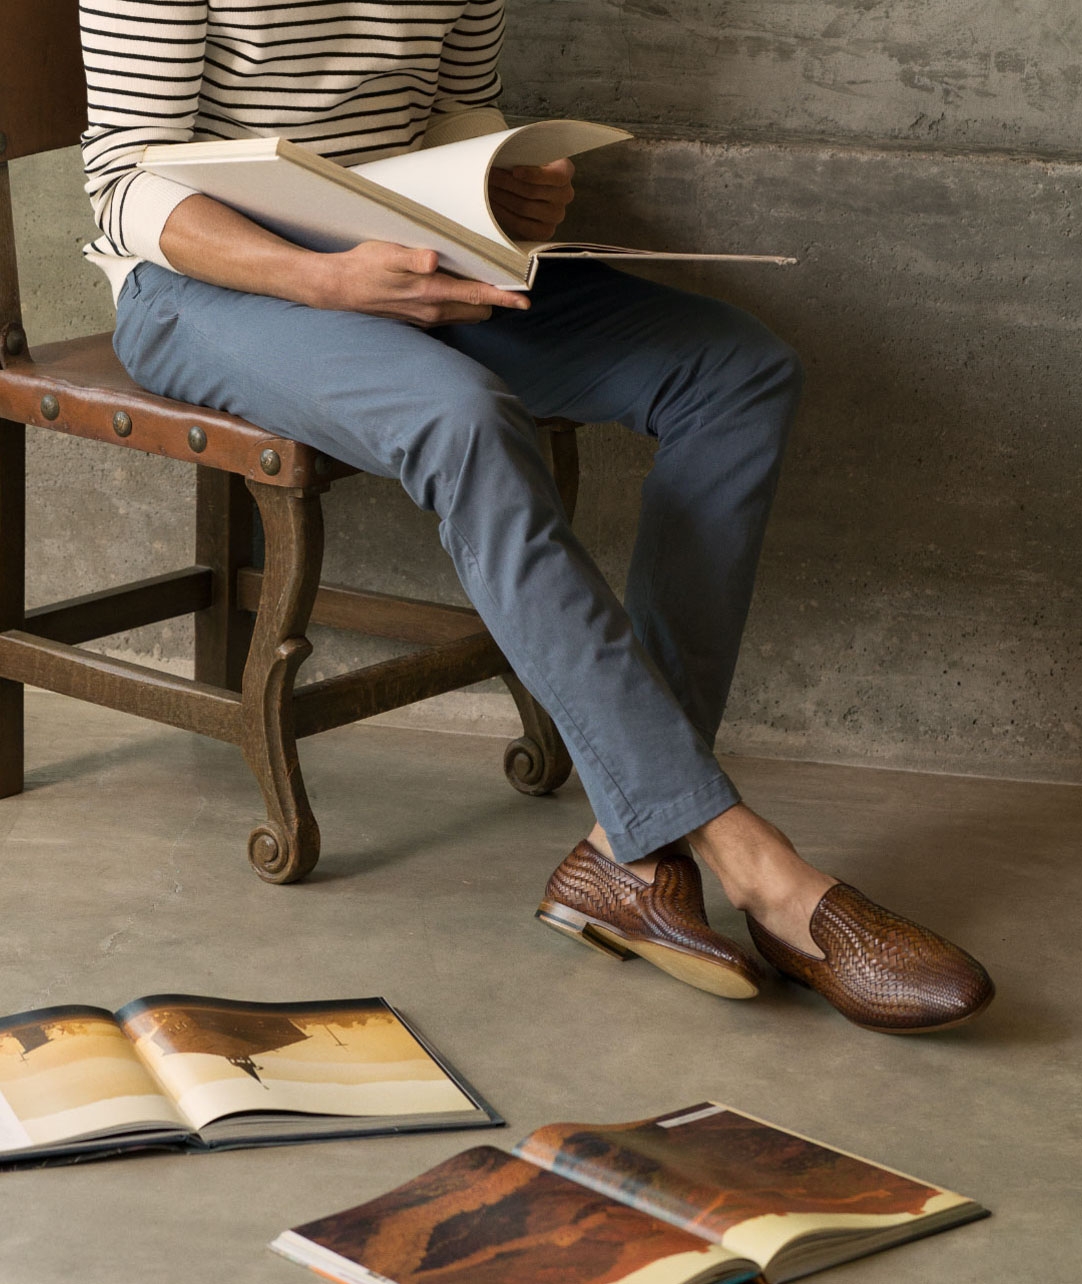 A male model wearing navy pants and Magnanni Herrera Cuero shoes reads a book while sitting on a wooden chair.